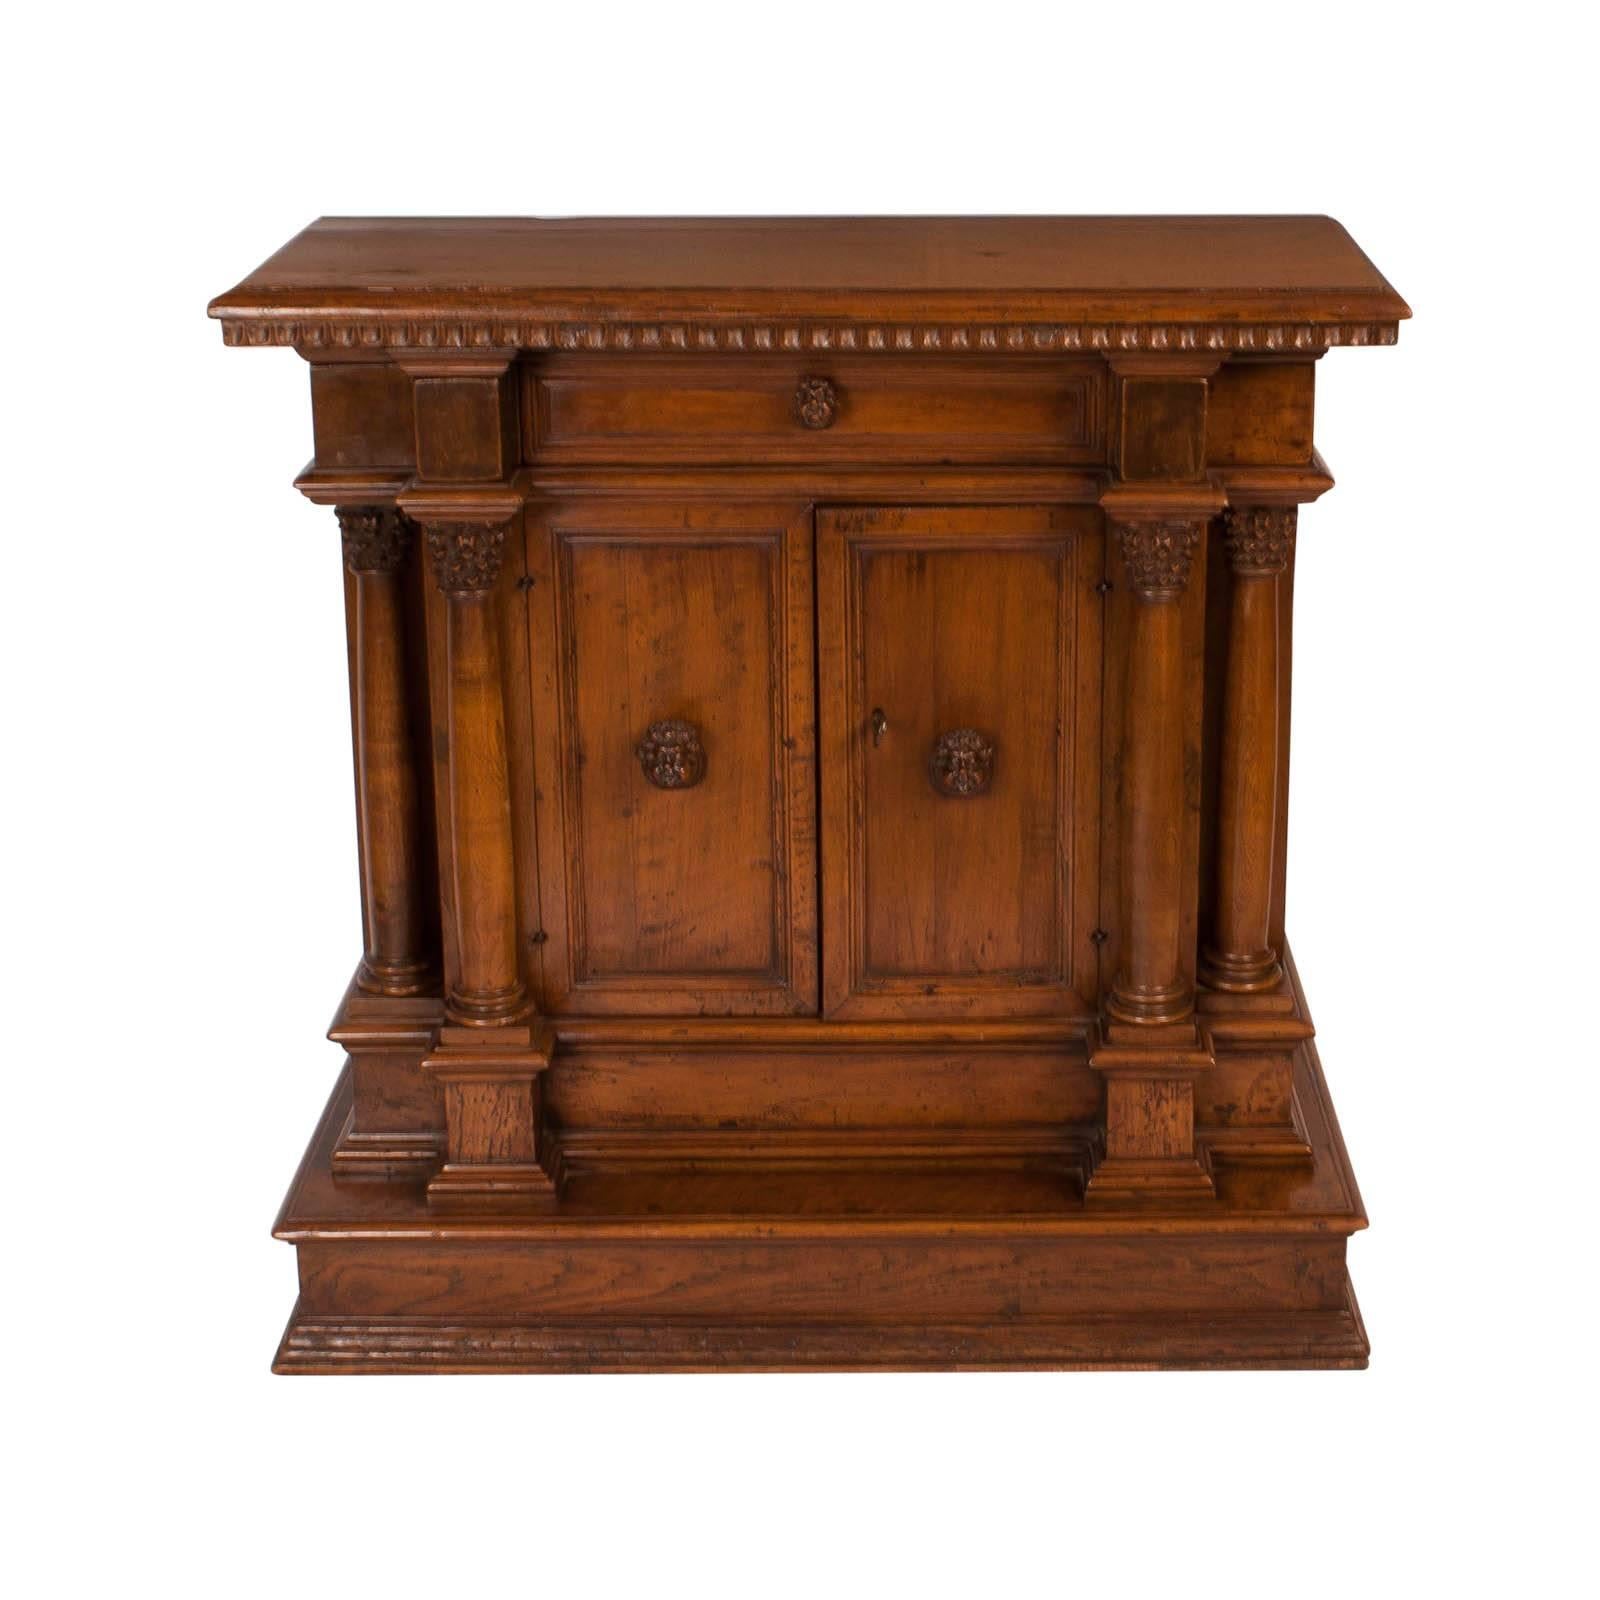 A handsome well carved and detailed Italian walnut Baroque credenza made in Italy, circa 1800. The piece is not orange. Or light image 6 is the best representation of color. The size is particularly useful. The carved faces as handles suggests this